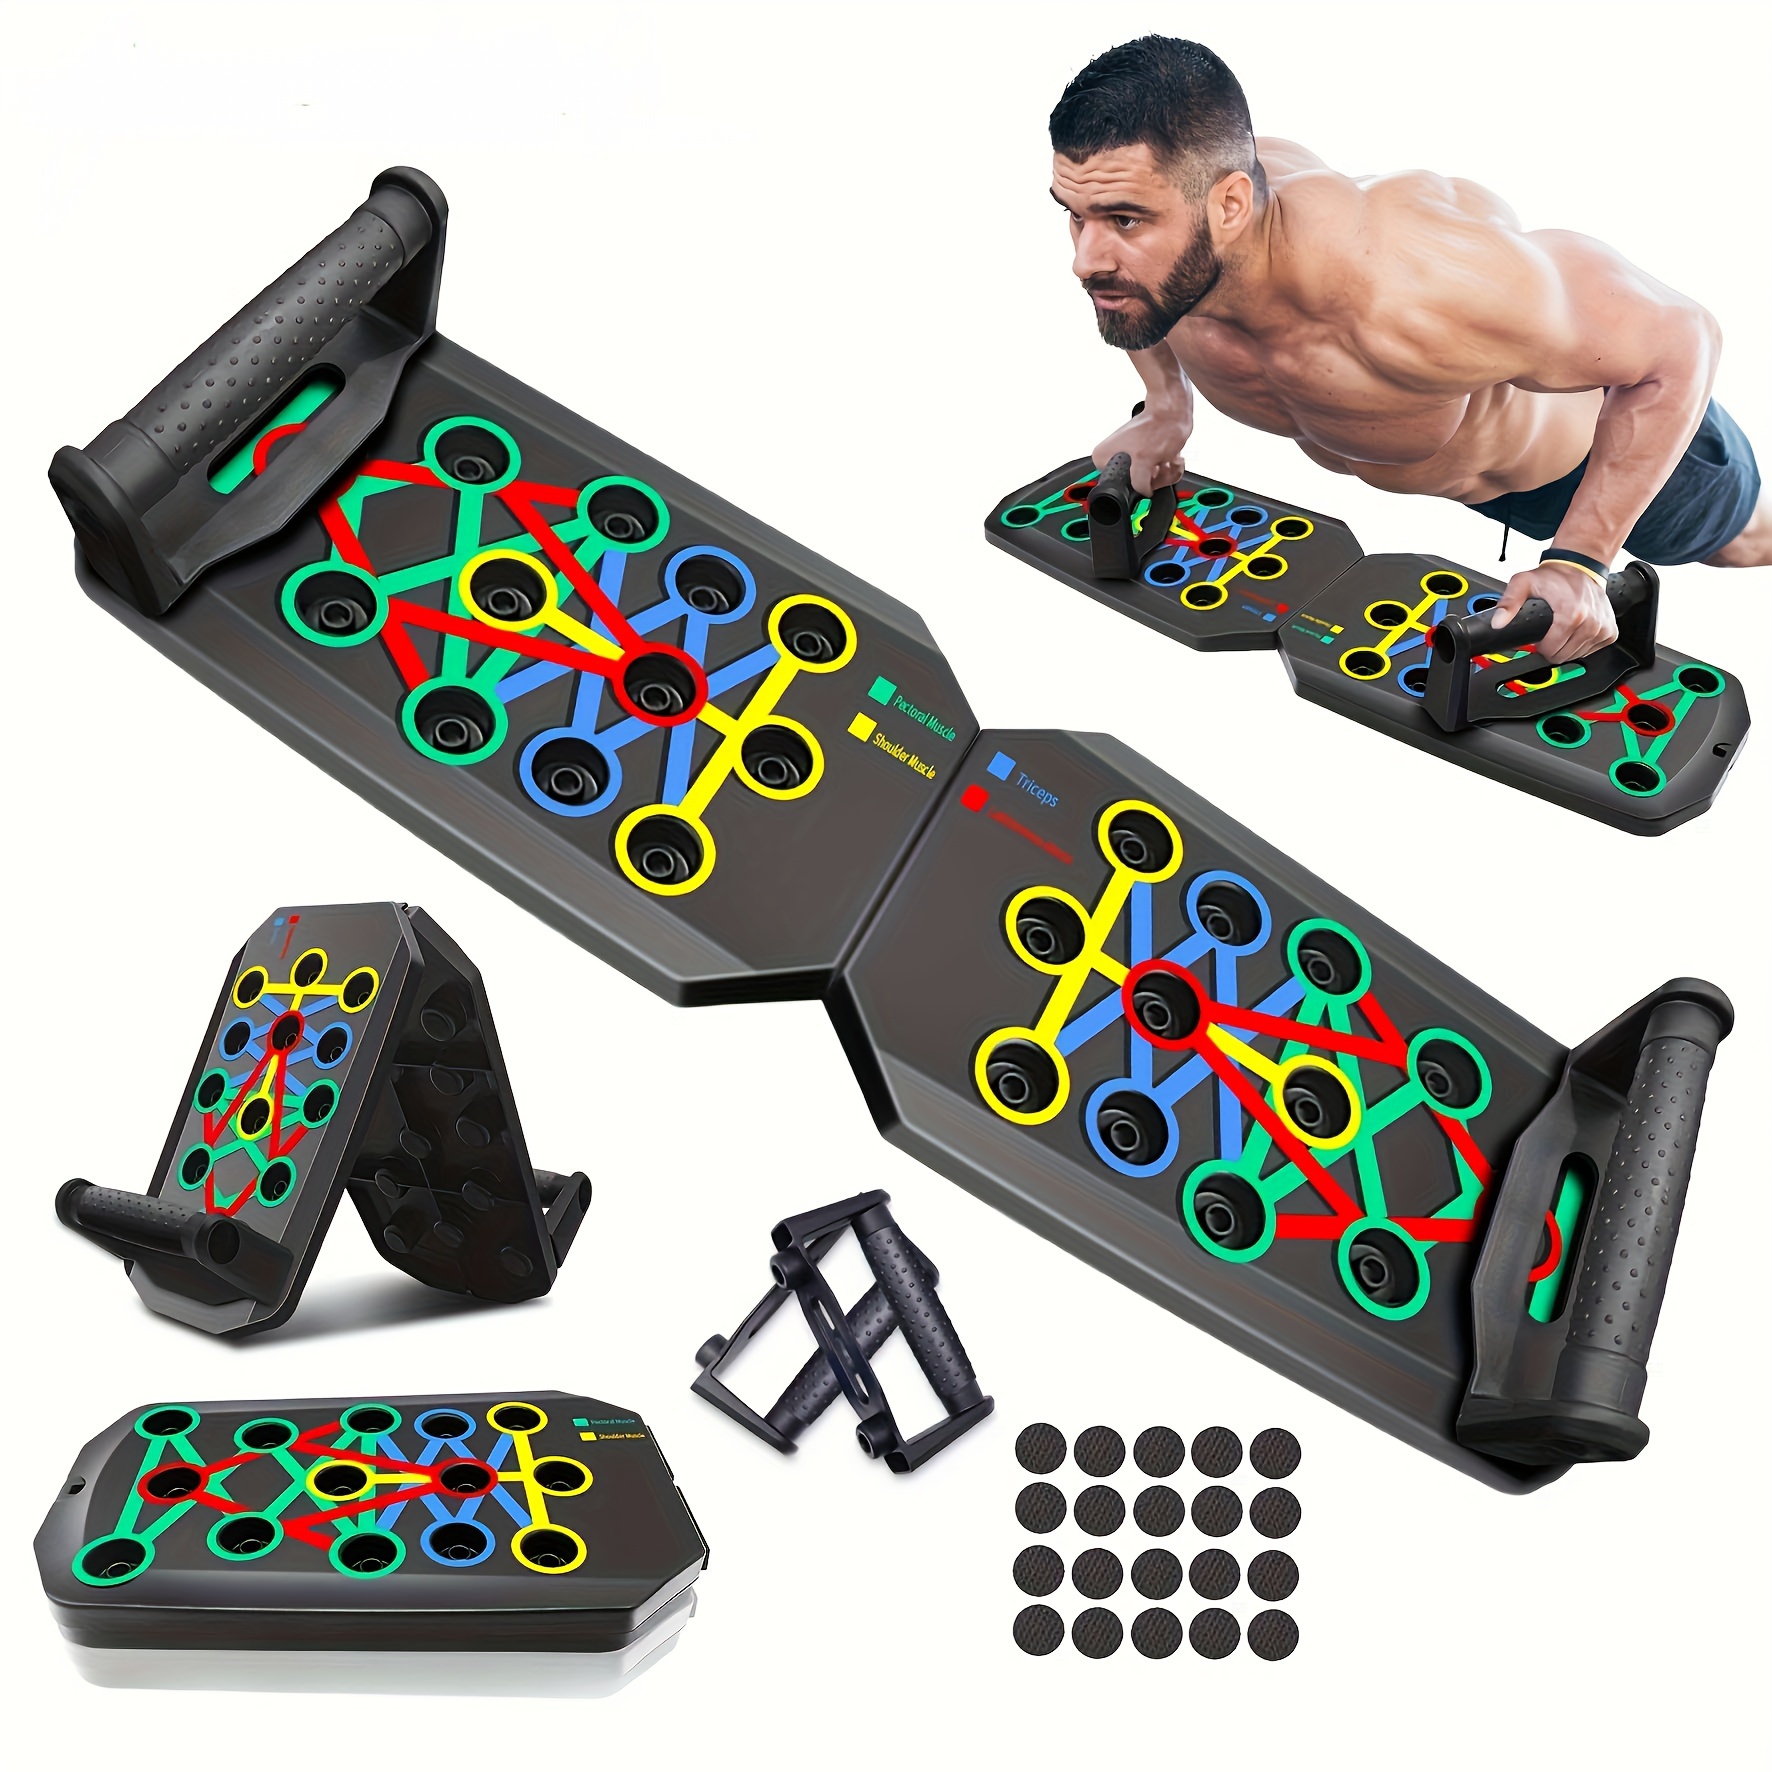 

1pc Multifunctional Folding Push-up Board, 28/30 Holes Push-up Board Without Timer, For Home And Gym Workouts, Chest Muscle Building And Core Strength Training